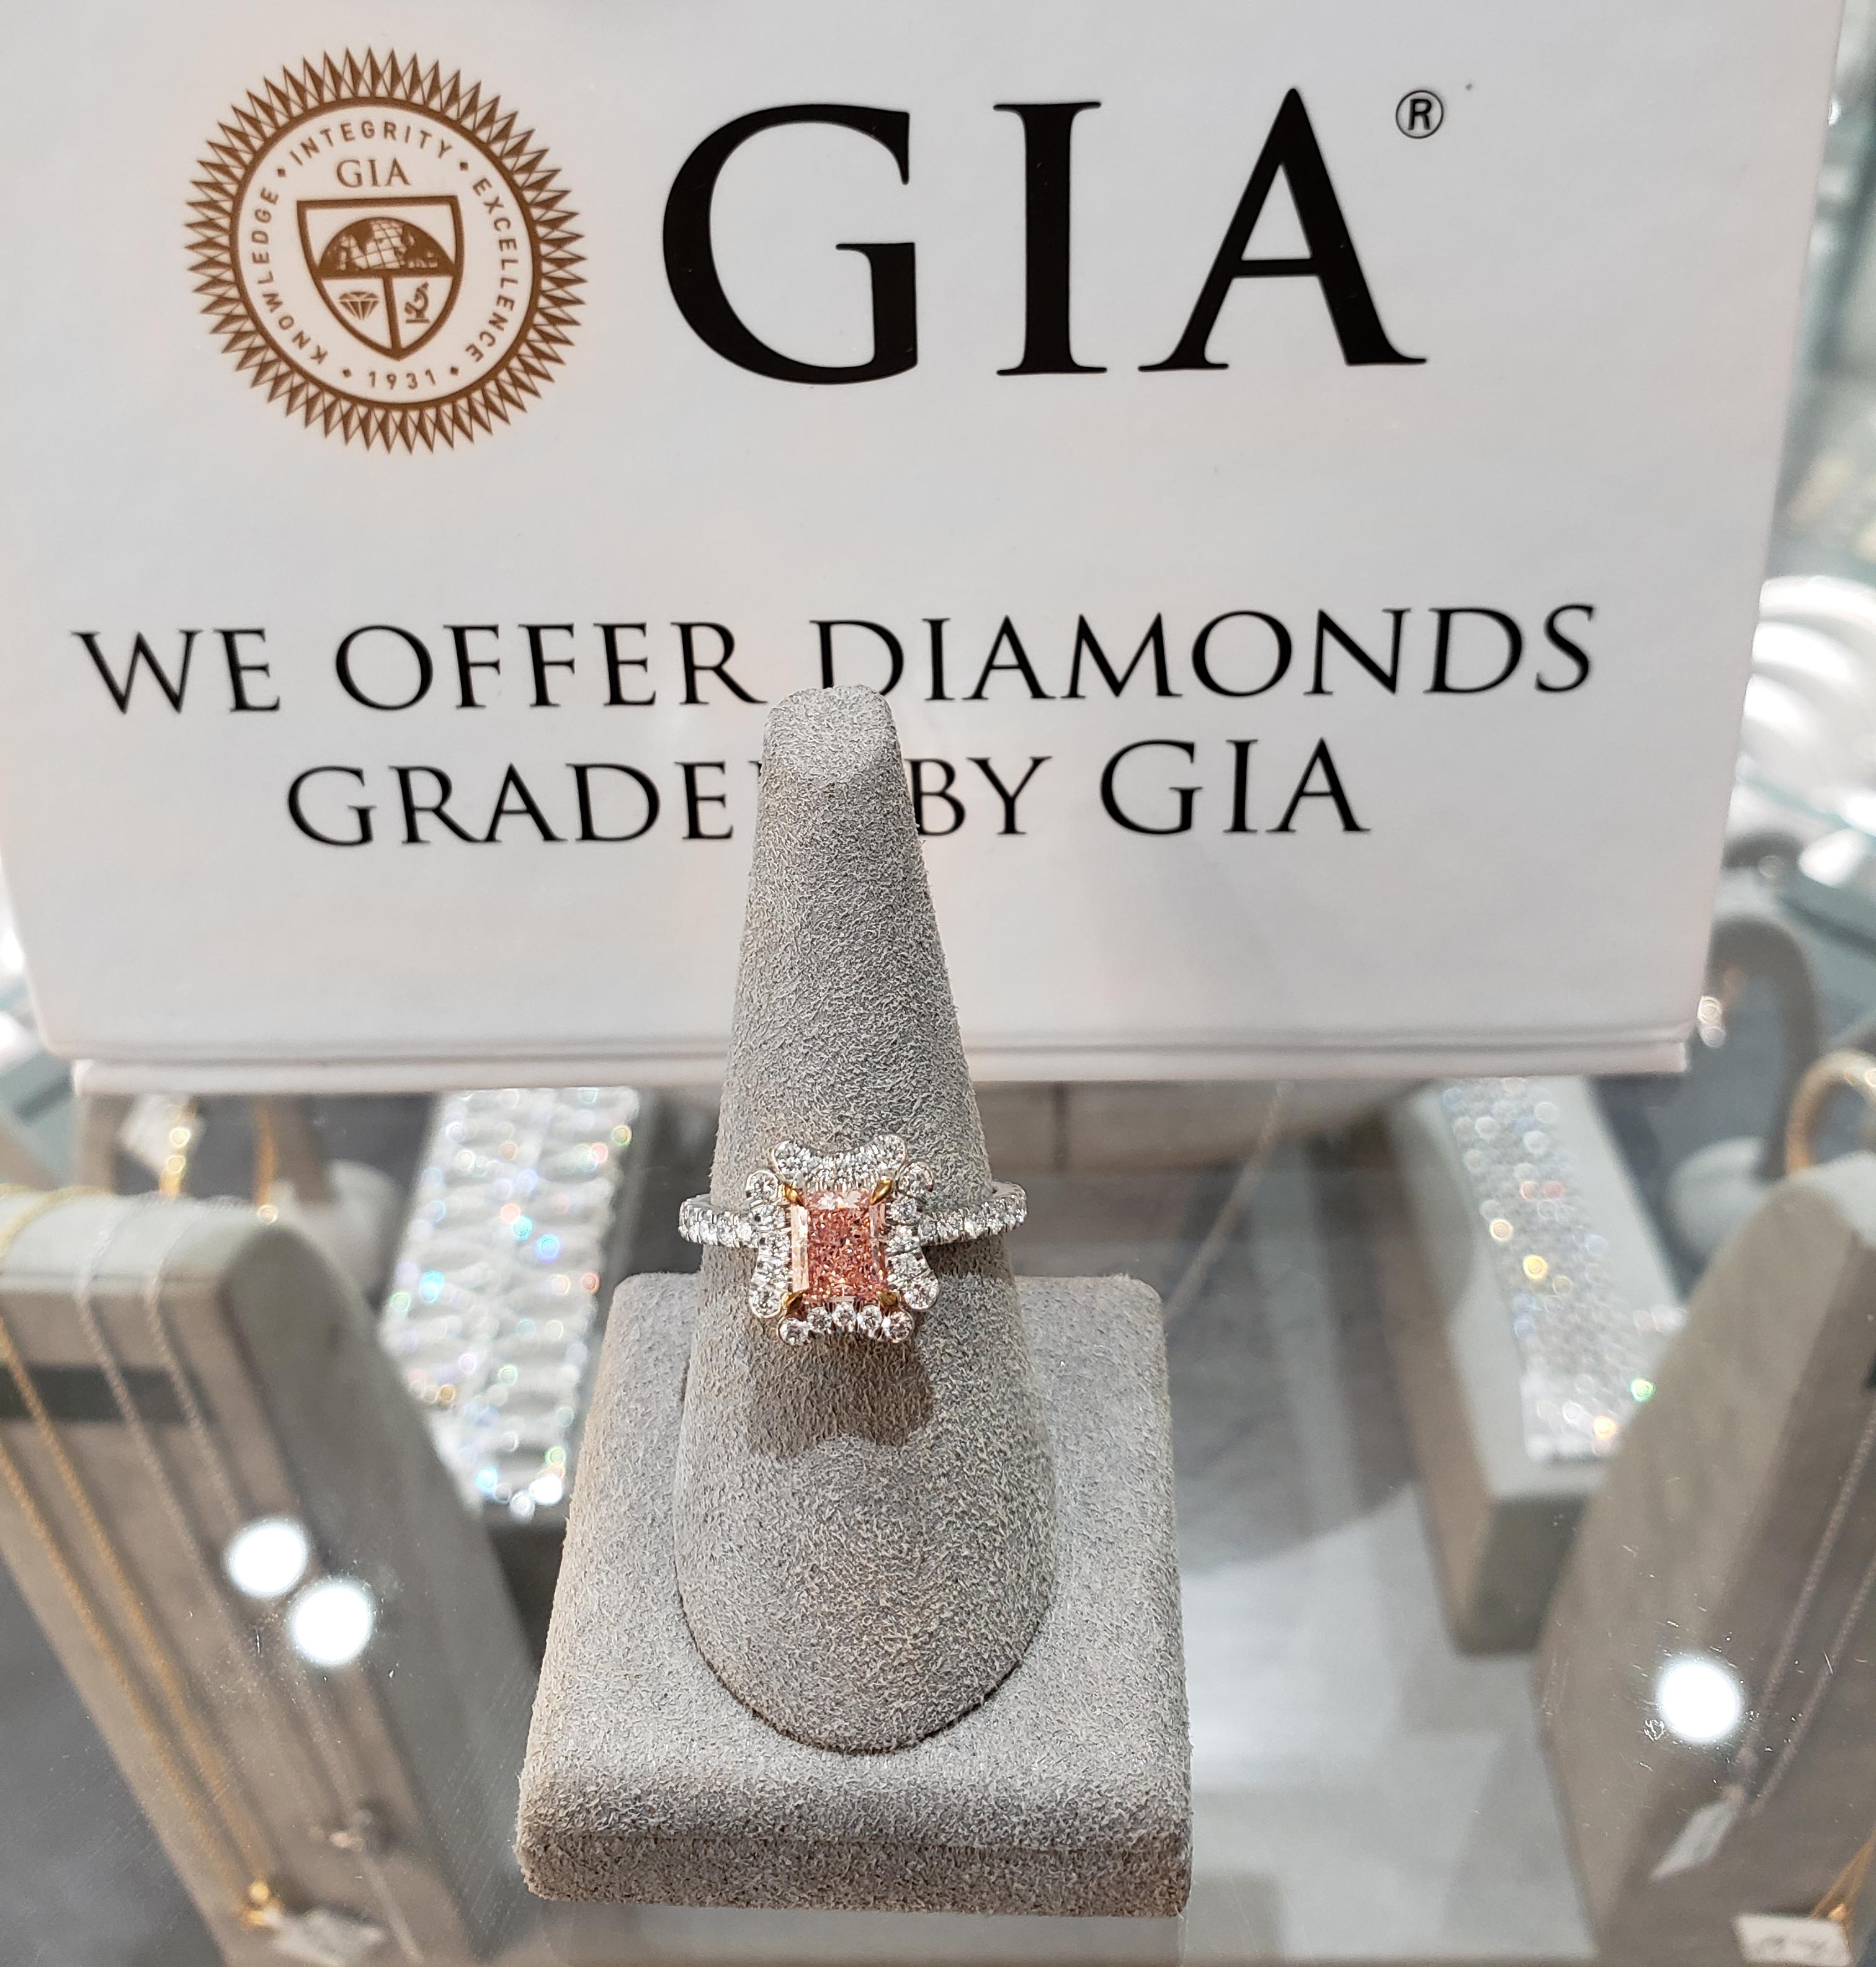 Rare and elegantly made halo engagement ring featuring a vibrant 0.88 carat radiant cut pink diamond that GIA certified as fancy brownish pink, SI1 in clarity, set in an 18k yellow gold four prong setting. The center stone is surrounded by an